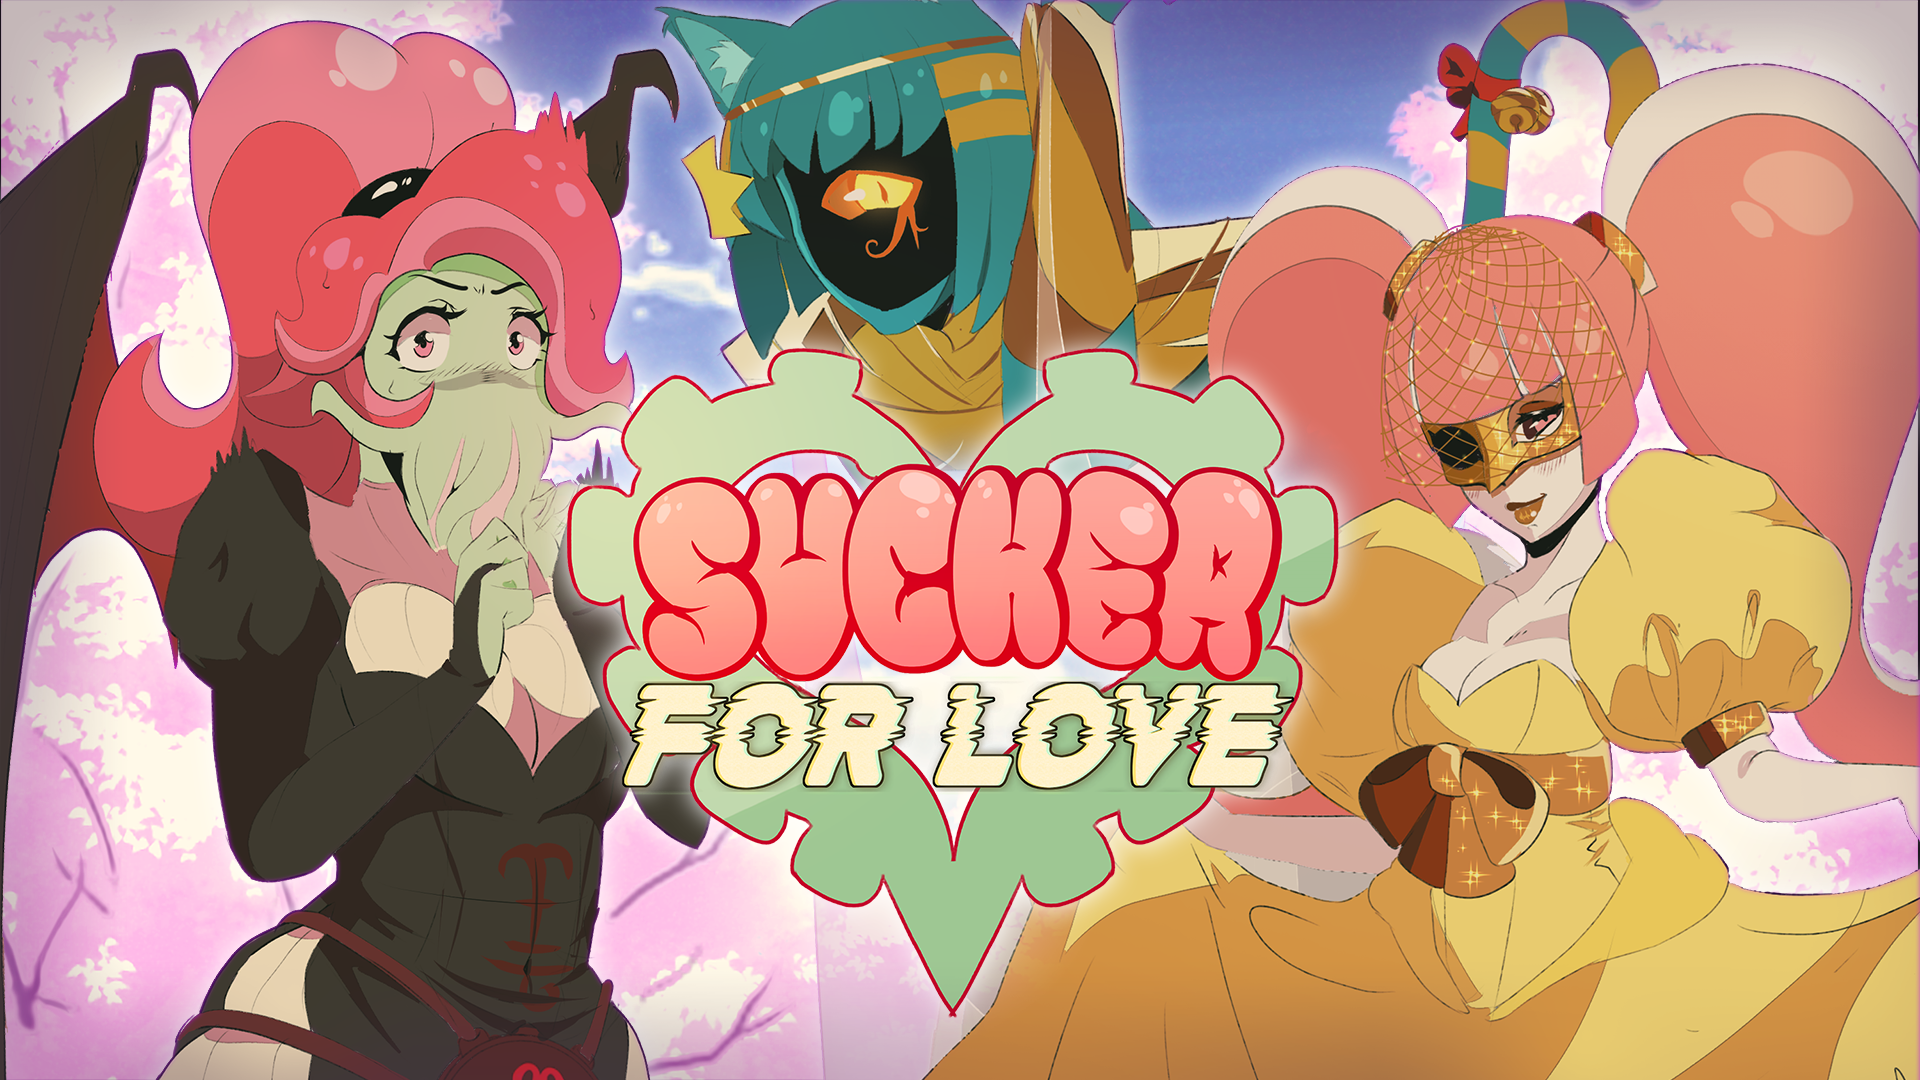 First Sex New Girl Free Download - Sucker For Love: First Date [COMPLETED] - free game download, reviews, mega  - xGames